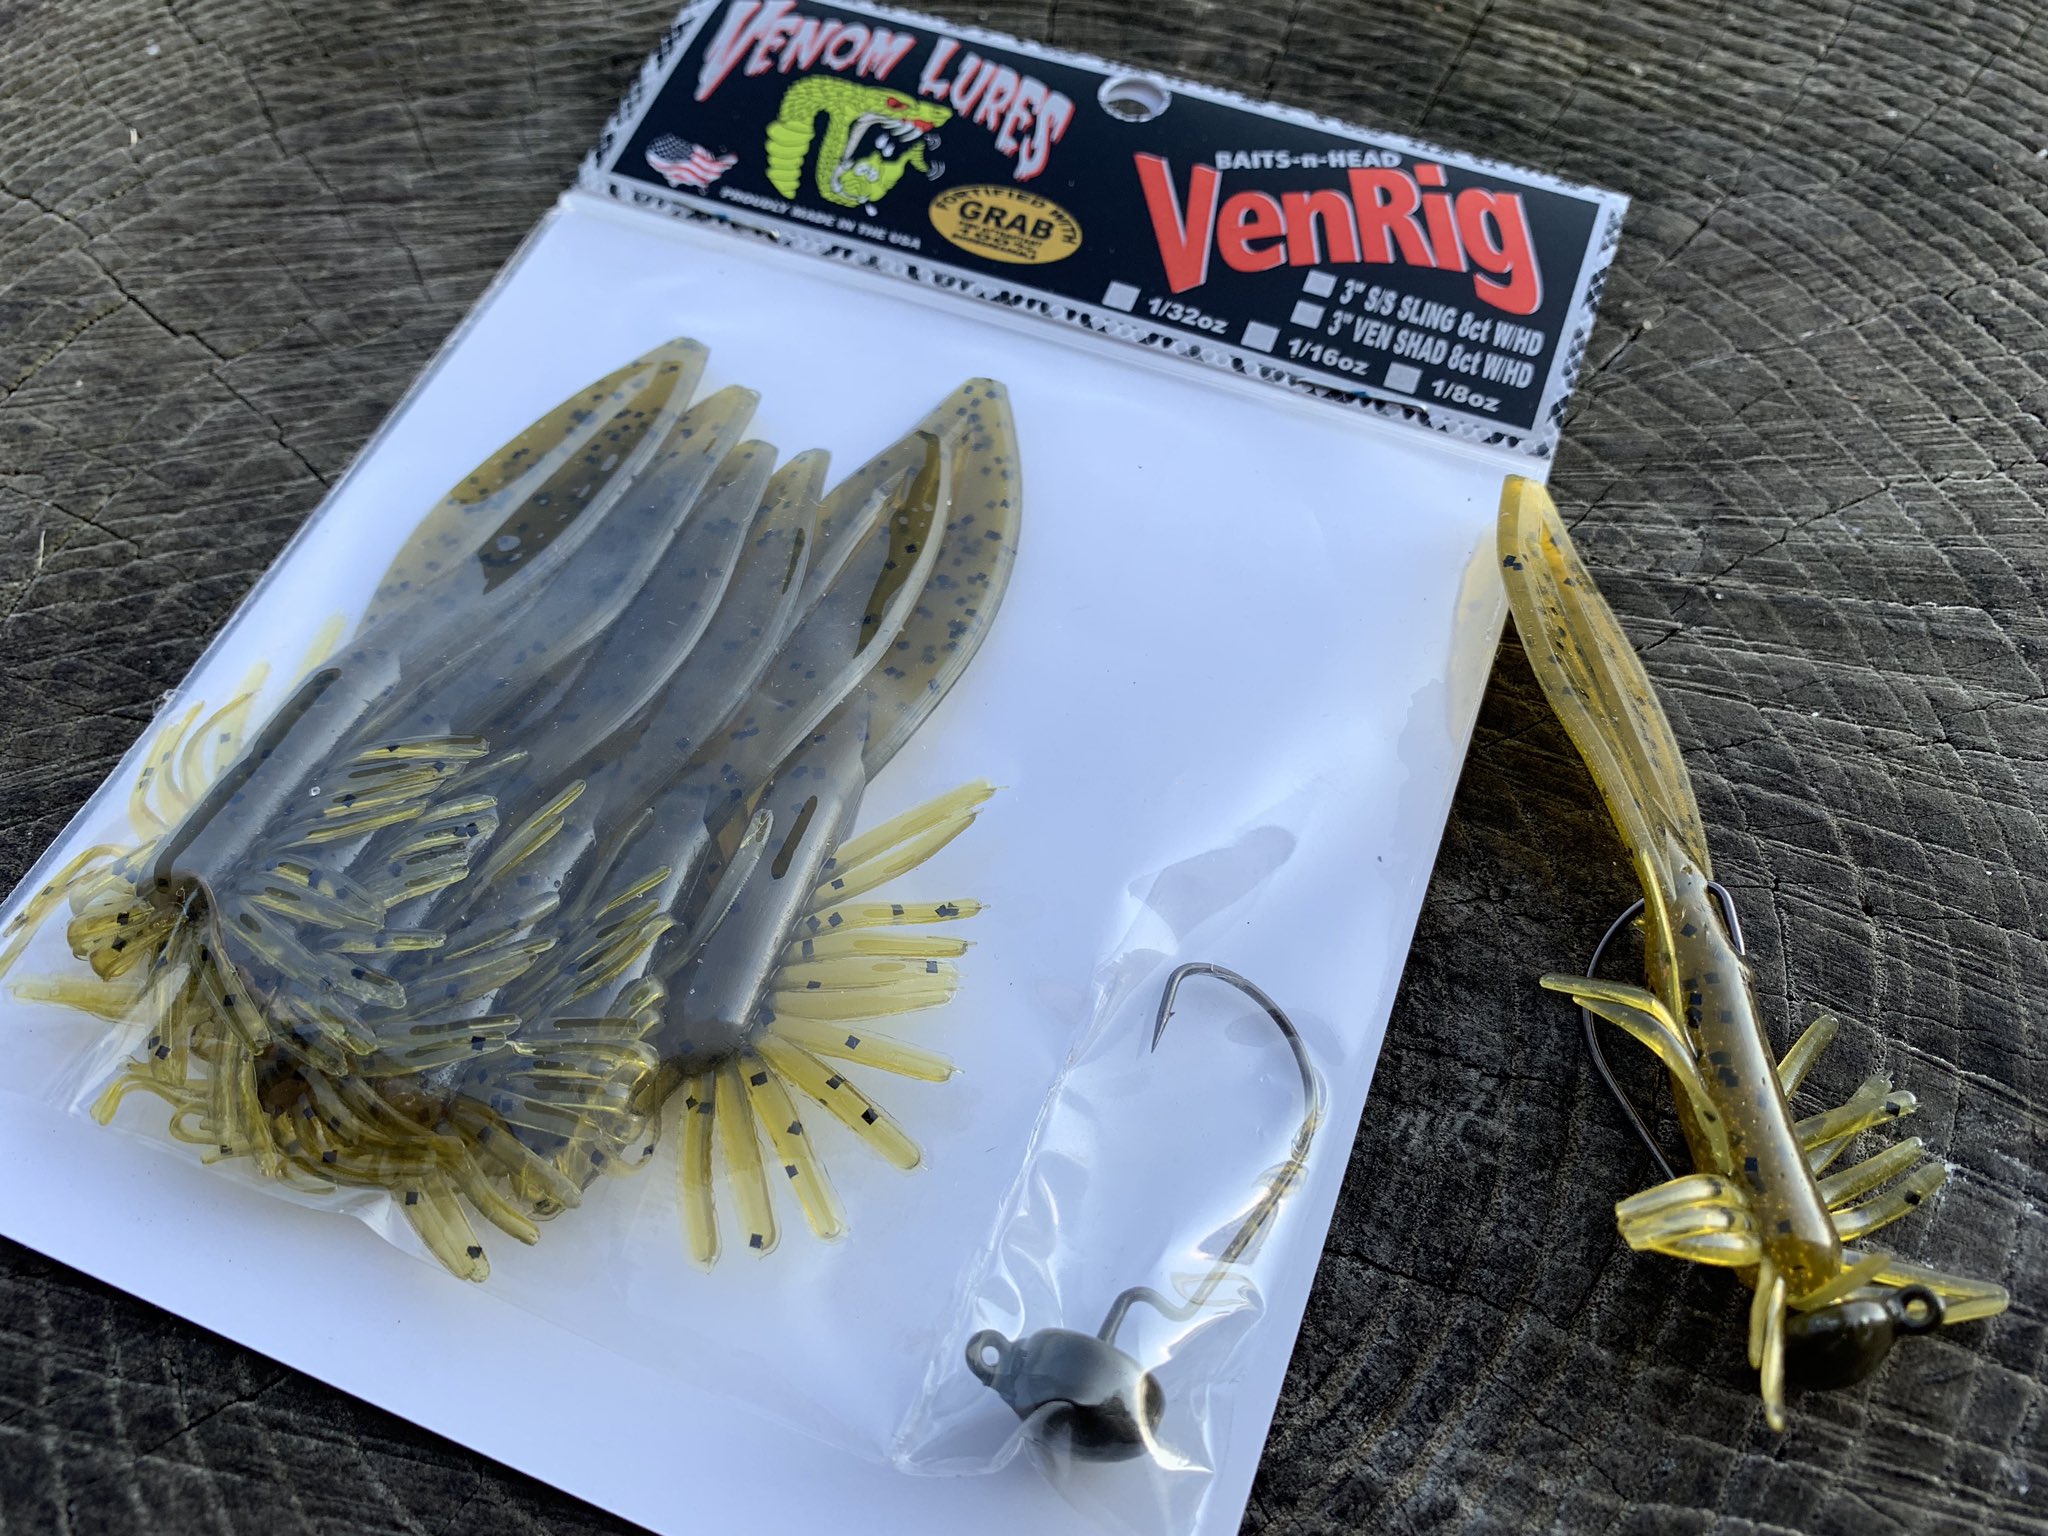 Venom Lures on X: The New Mad Tom Ven-Rig Kit comes with 7 of our  “one-of-a-kind” 3” Mad Tom creature stick baits, plus a new 1/0 Mini D-K  Rig Head. NEXT LEVEL